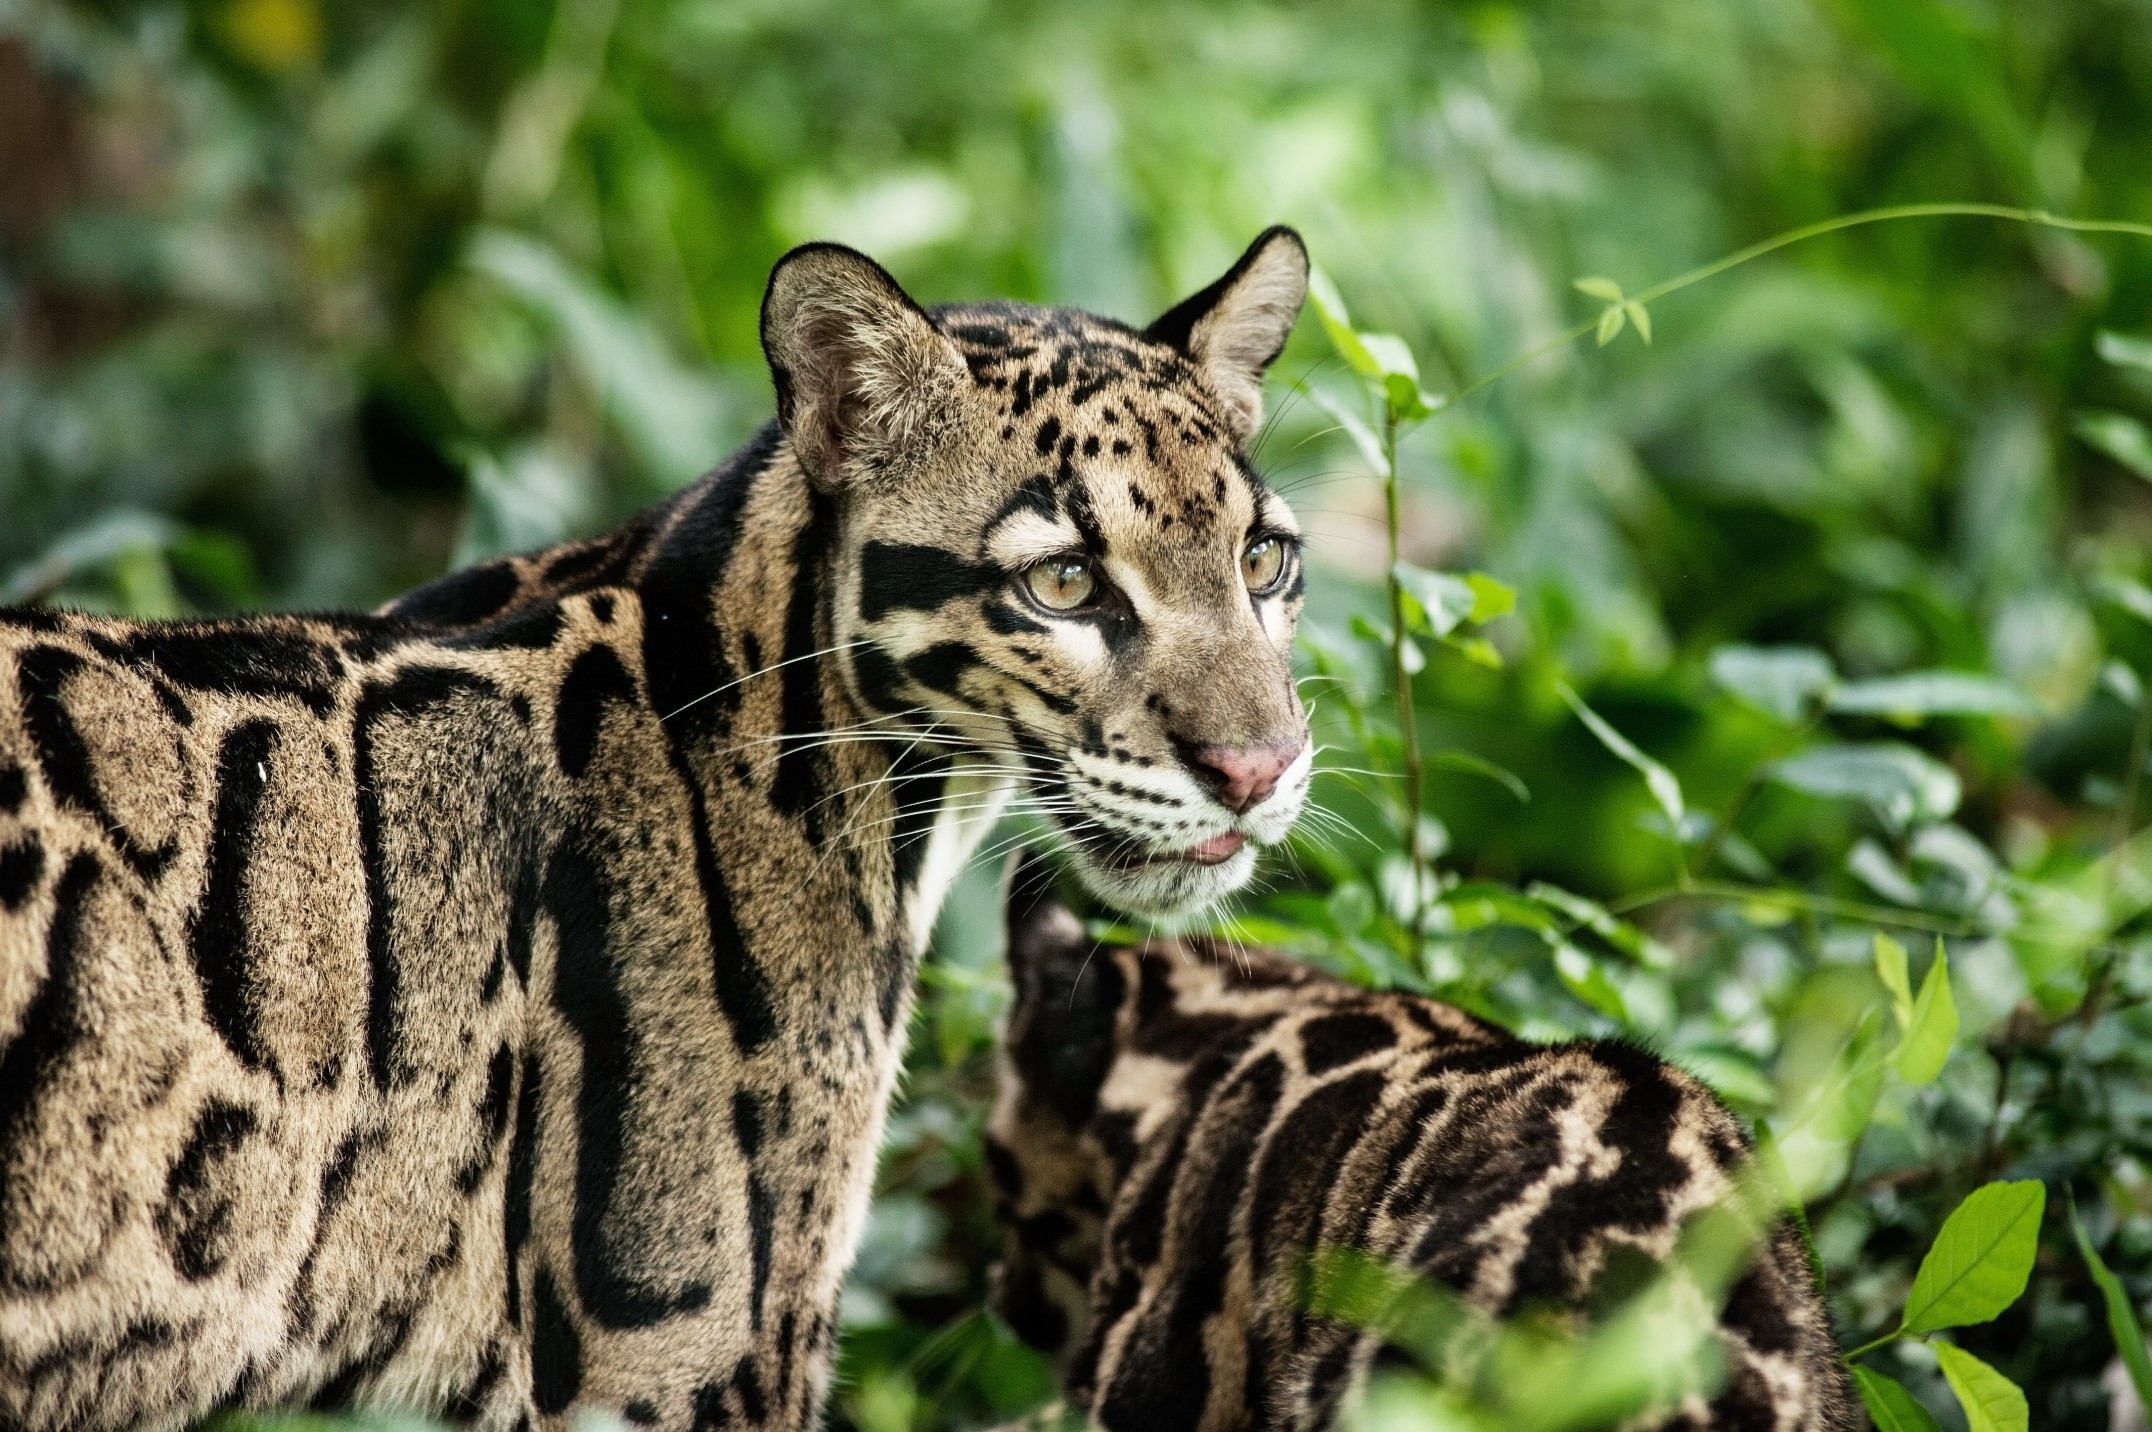 A study published this year by Kaszta et al. identified 42 core areas for the clouded leopard and revealed that the most important ones are concentrated in Southeast Asia, mainly in Myanmar, Laos and Malaysia, but only a quarter of these core areas are protected.